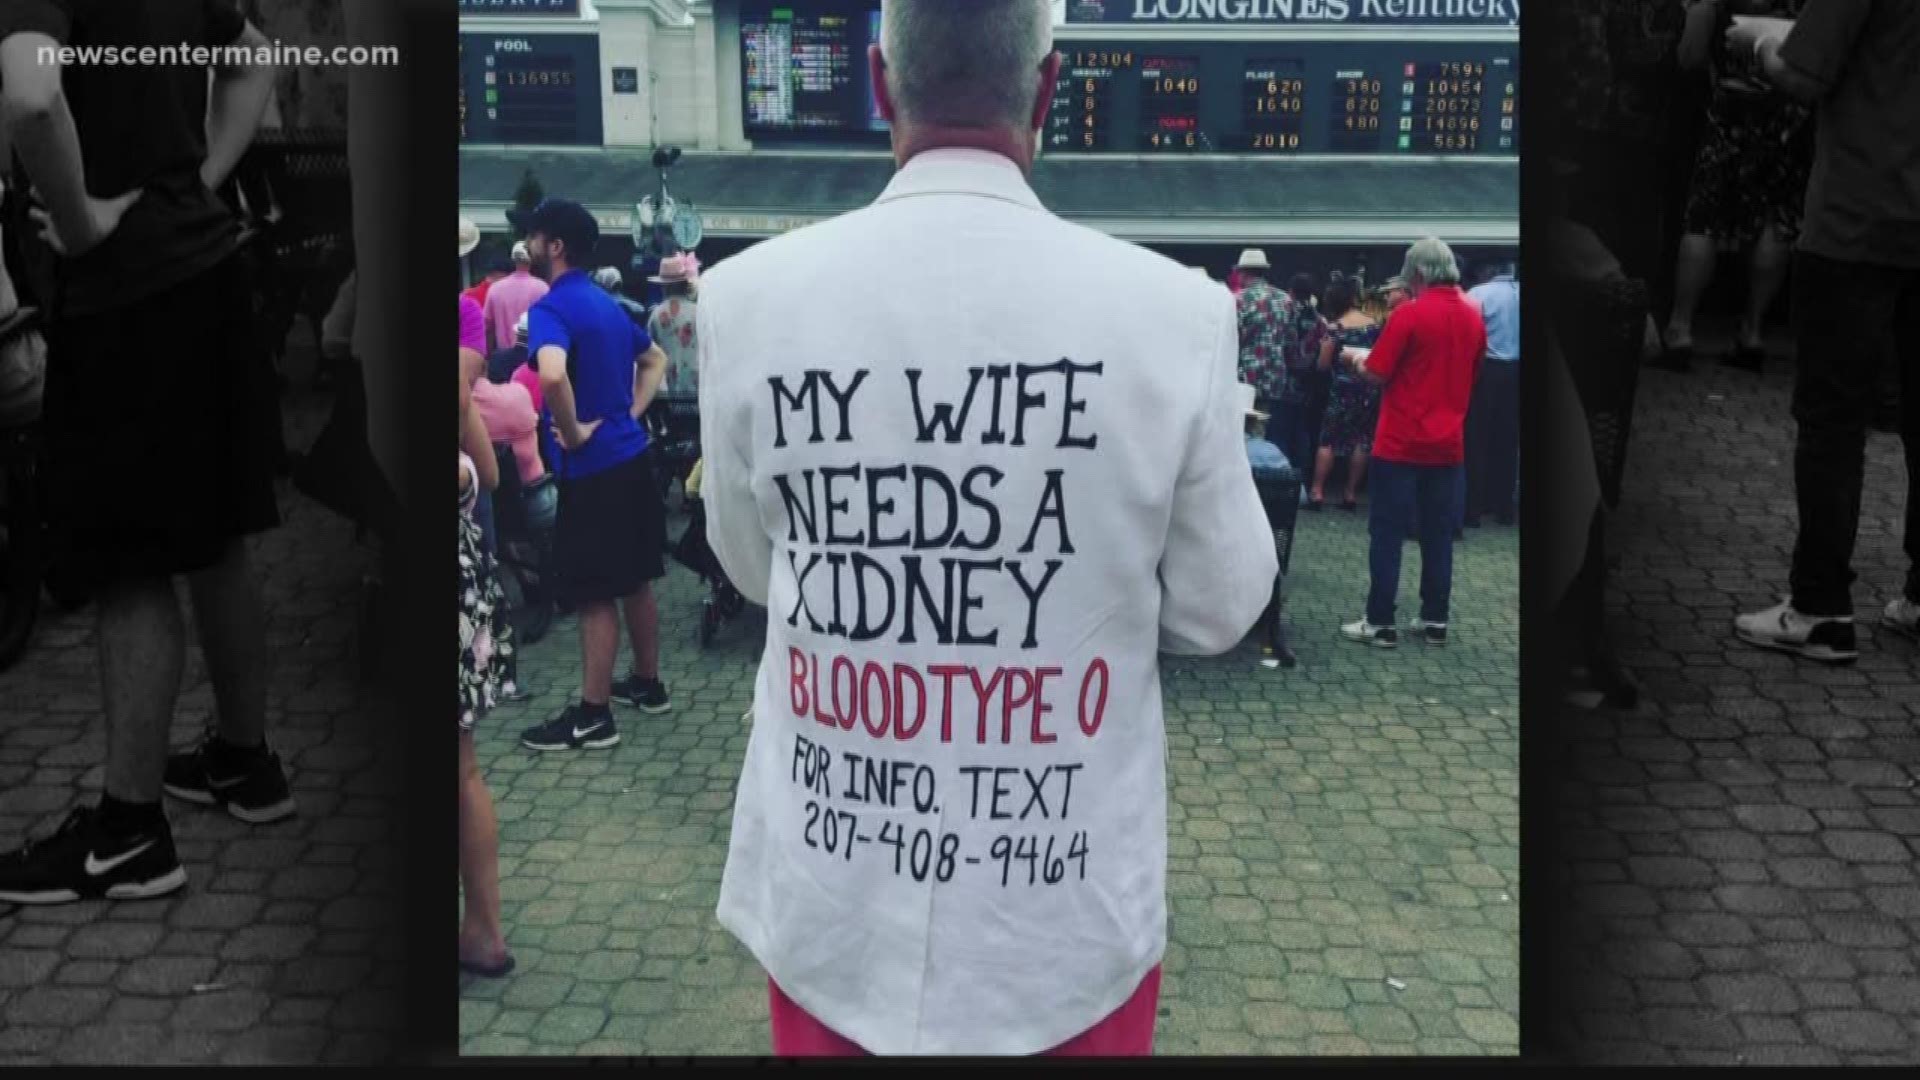 Husband seeks kidney for his wife